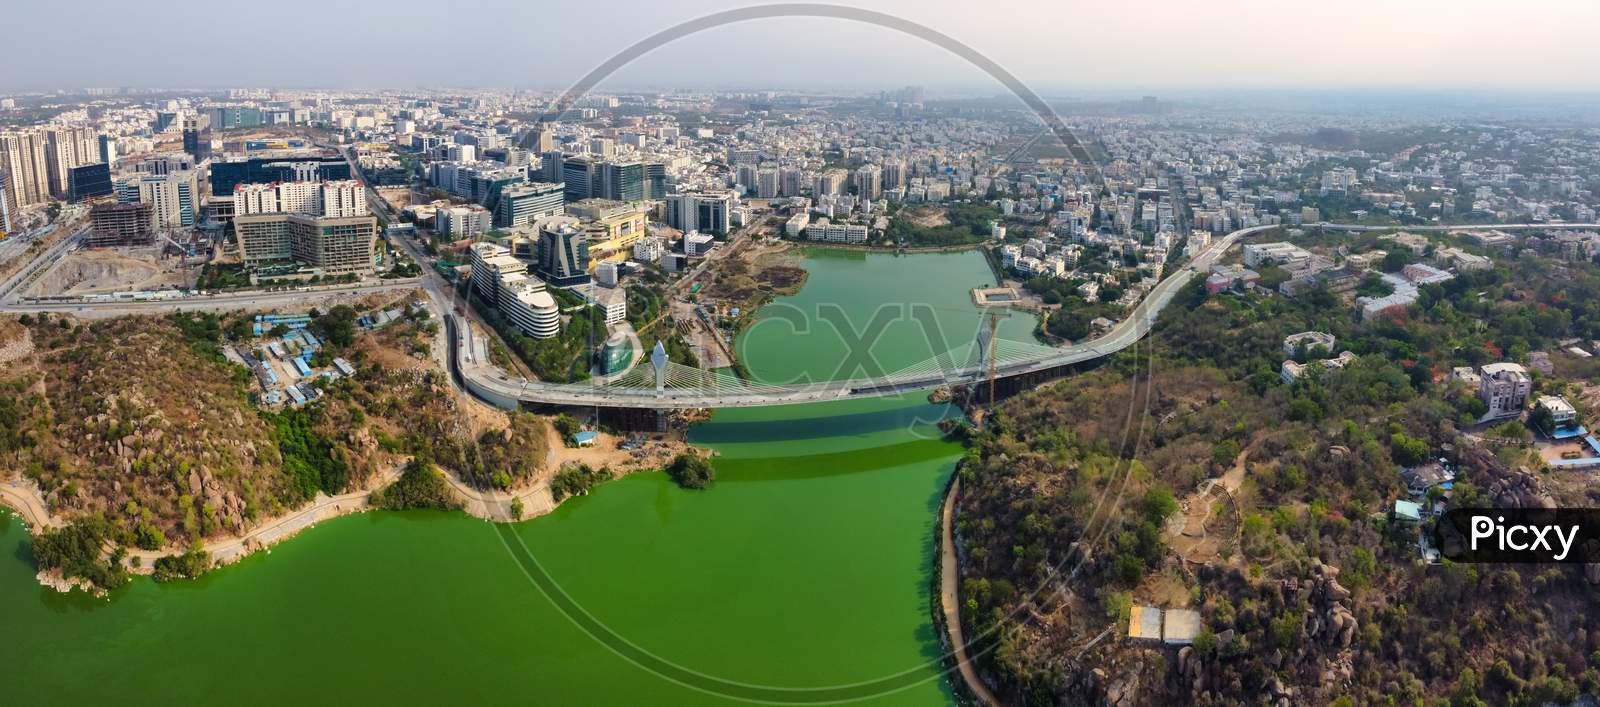 Aerial View Of Newly Constructed Cable Bridge At Durgam Cheruvu In Hyderabad